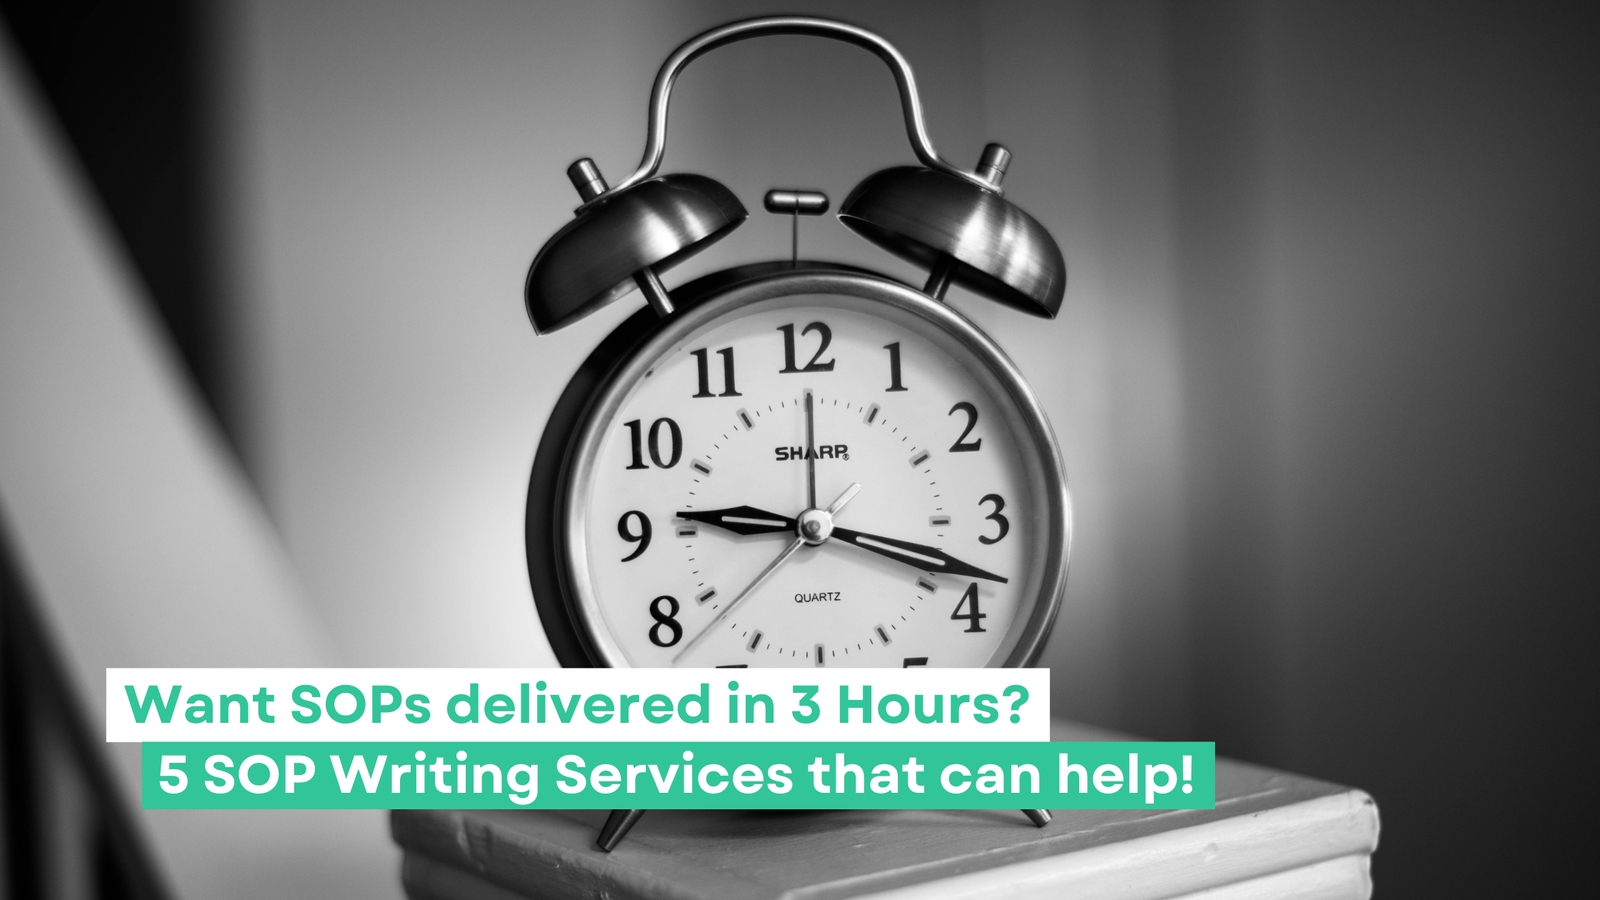 Want SOP delivered in 3 Hours? Here are 5 SOP Writing Services that can help!